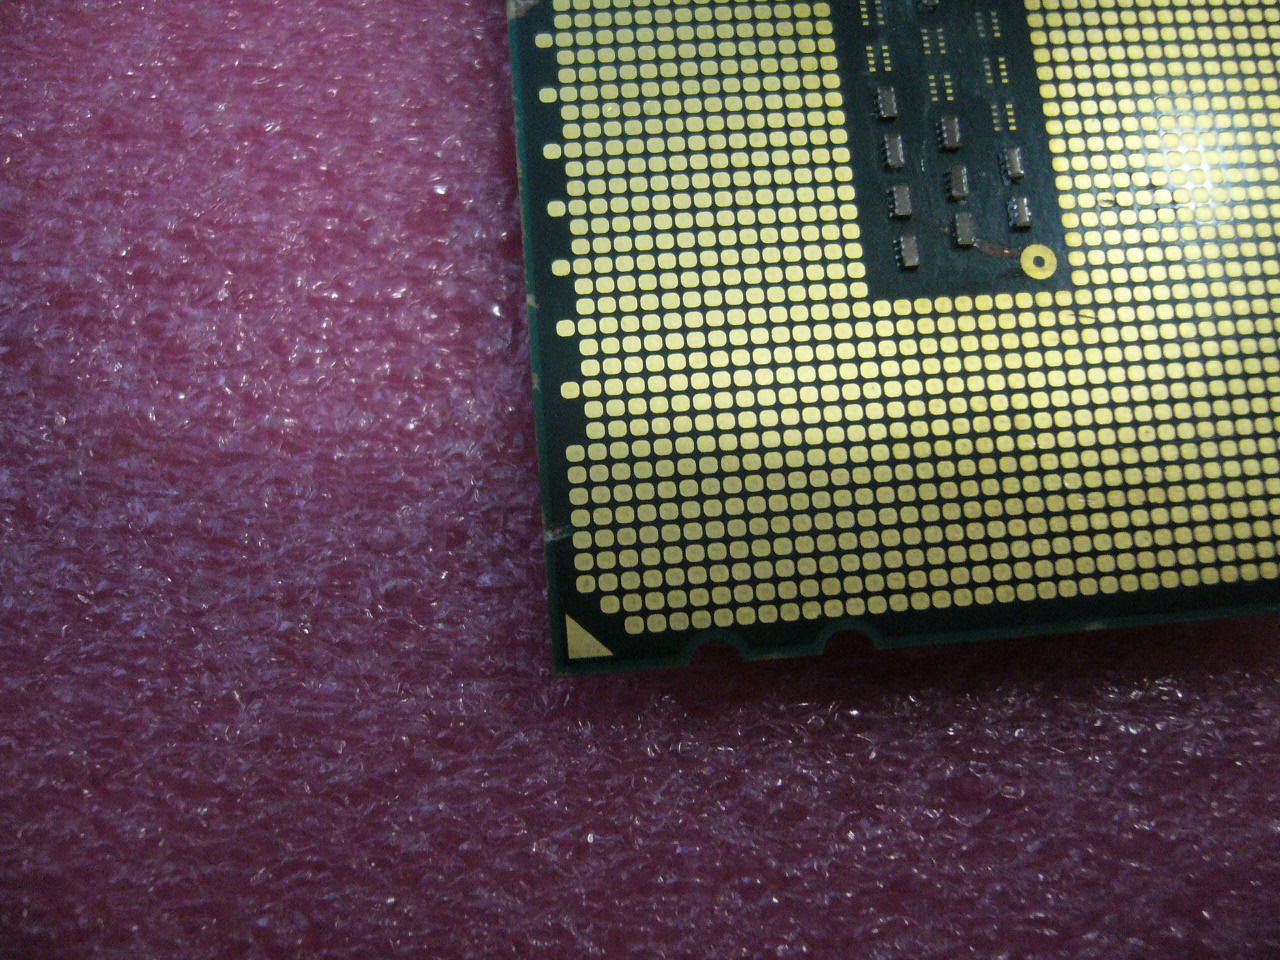 QTY 1x AMD Opteron 6176 SE 2.3 GHz Twelve Core (OS6176YETCEGO) CPU Tested G34 - Click Image to Close